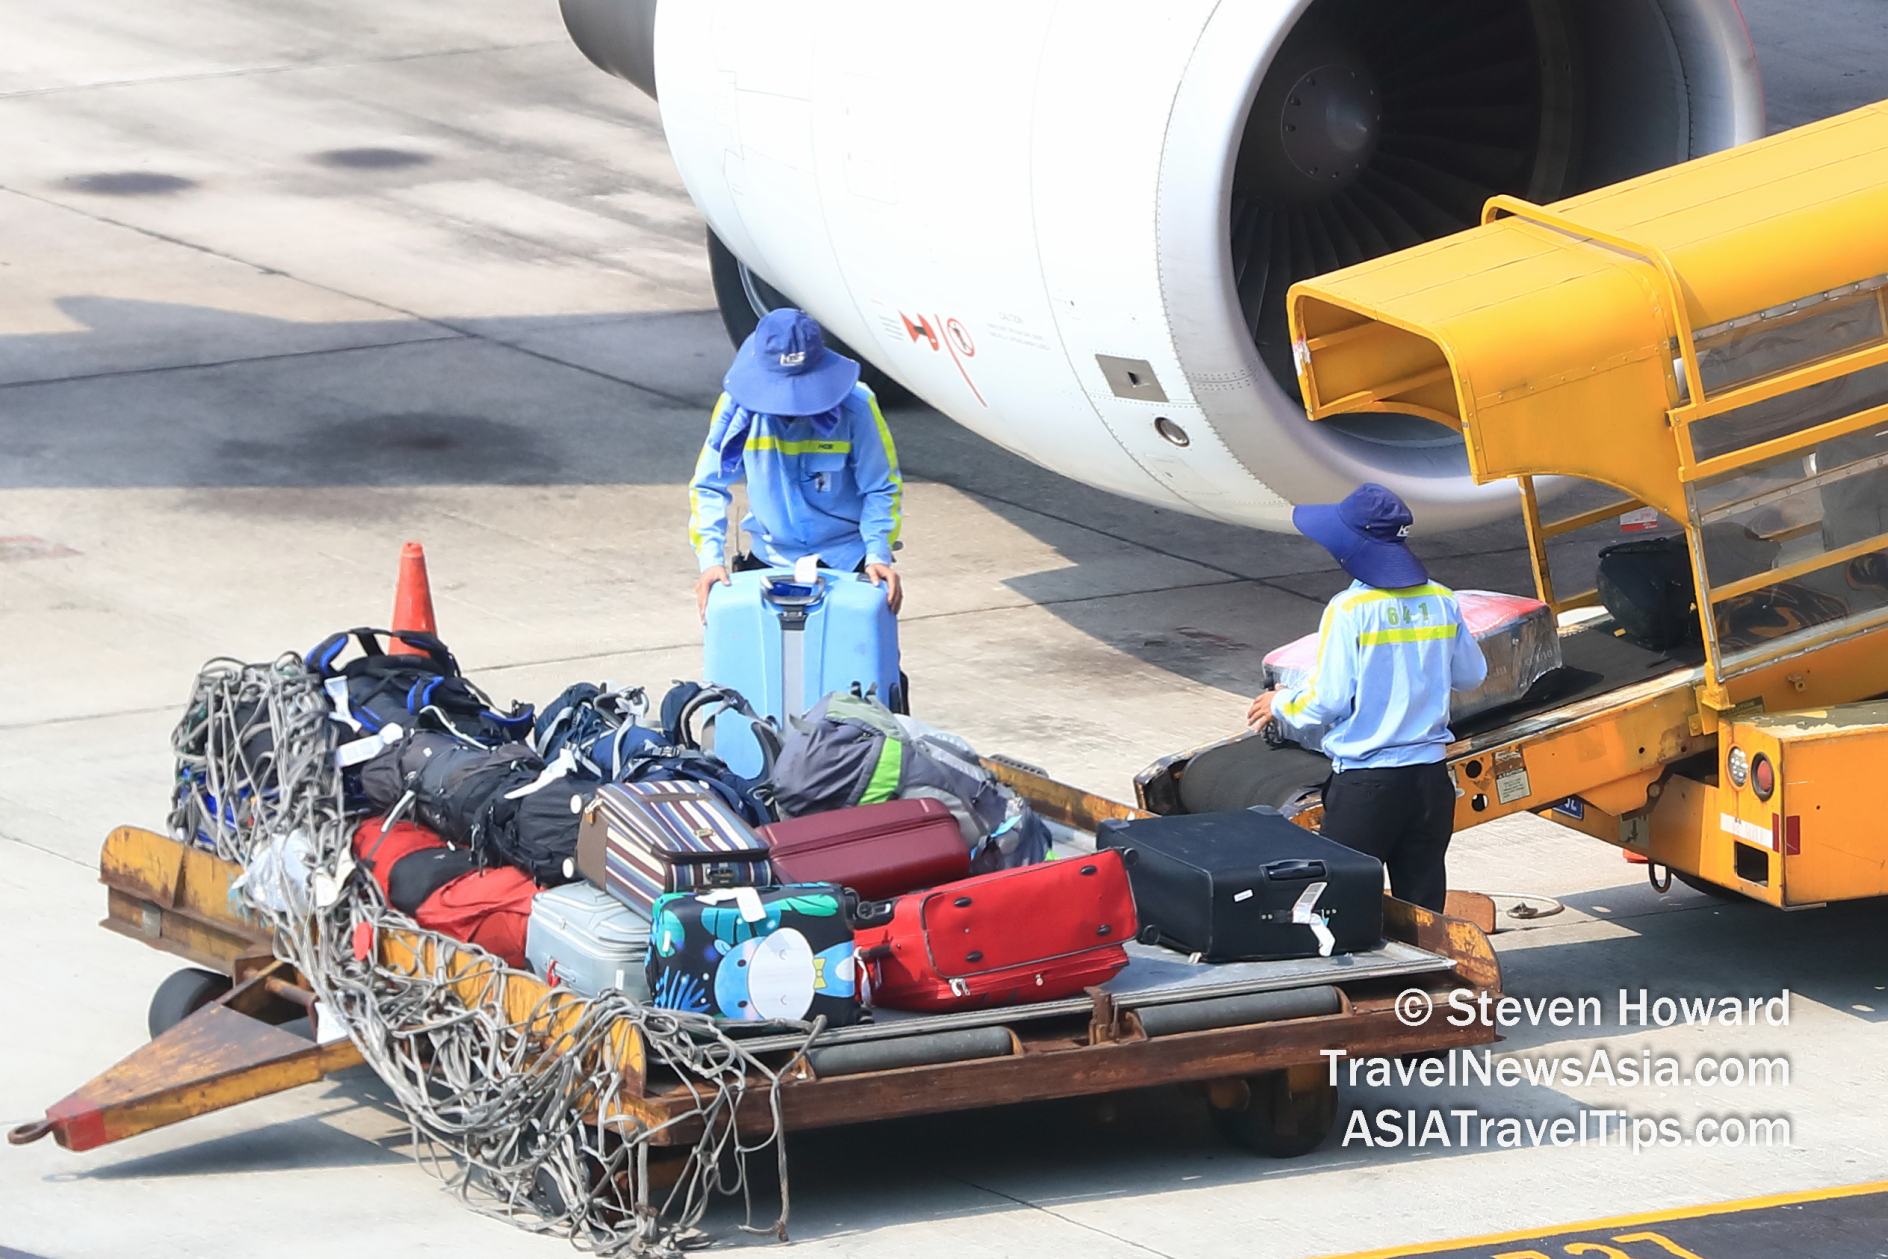 Baggage being loaded onto an aircraft. Picture by Steven Howard of TravelNewsAsia.com Click to enlarge.